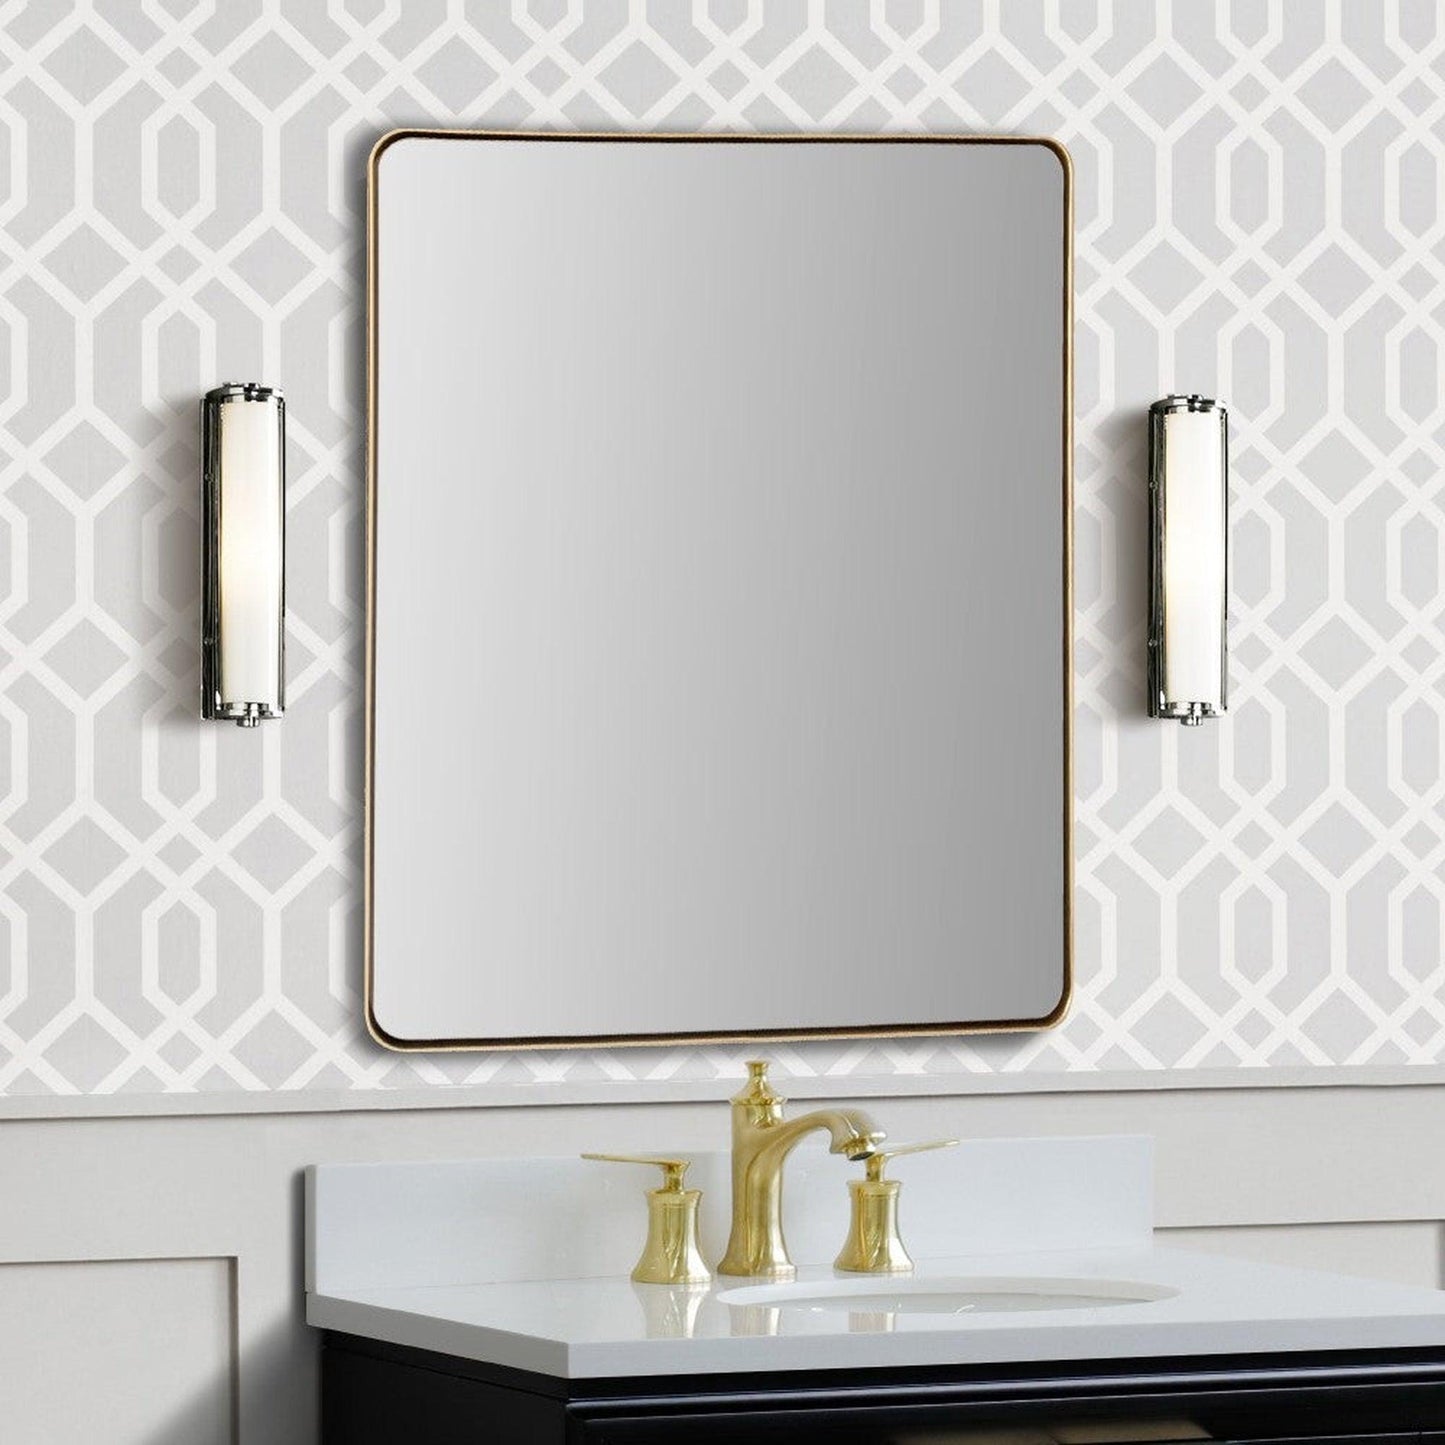 Bellaterra Home 24" x 28" Gold Rectangle Wall-Mounted Steel Framed Mirror With Rounded Edges